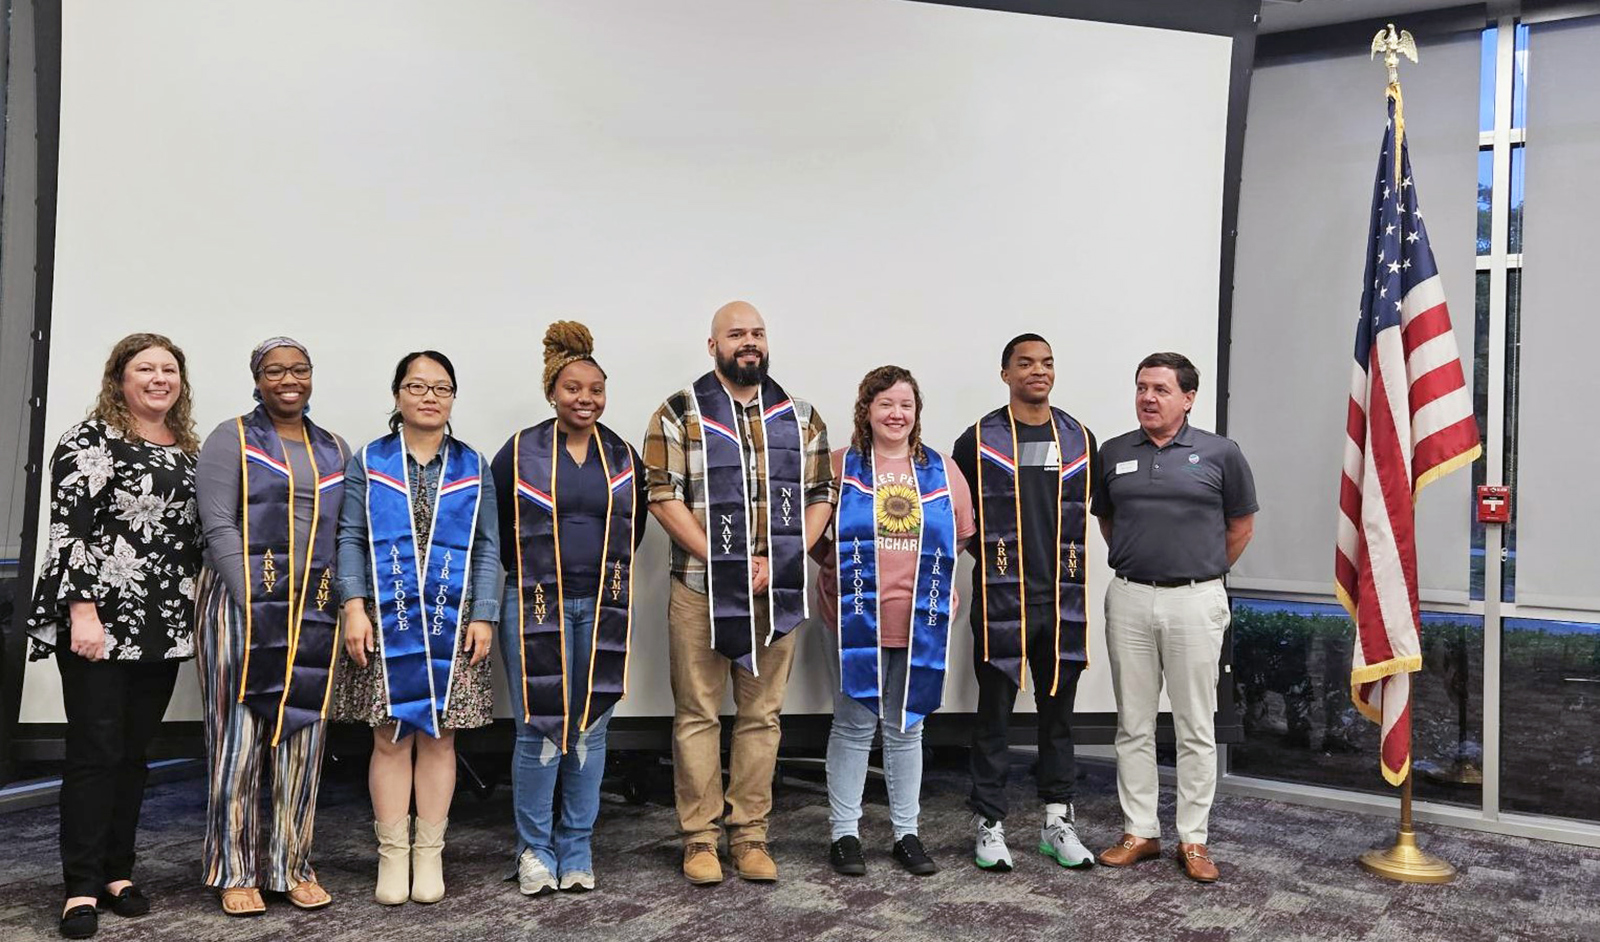 From left to right: Assistant Director of Military & Veterans Services Brandie Weaver, Rebekah McCall, Haihua Paige, Breona Alston, Jaime Ortiz, Amanda Grimes, Isaac Duncan, and Director of Financial Aid and Military & Veterans Services Marc Vernon.